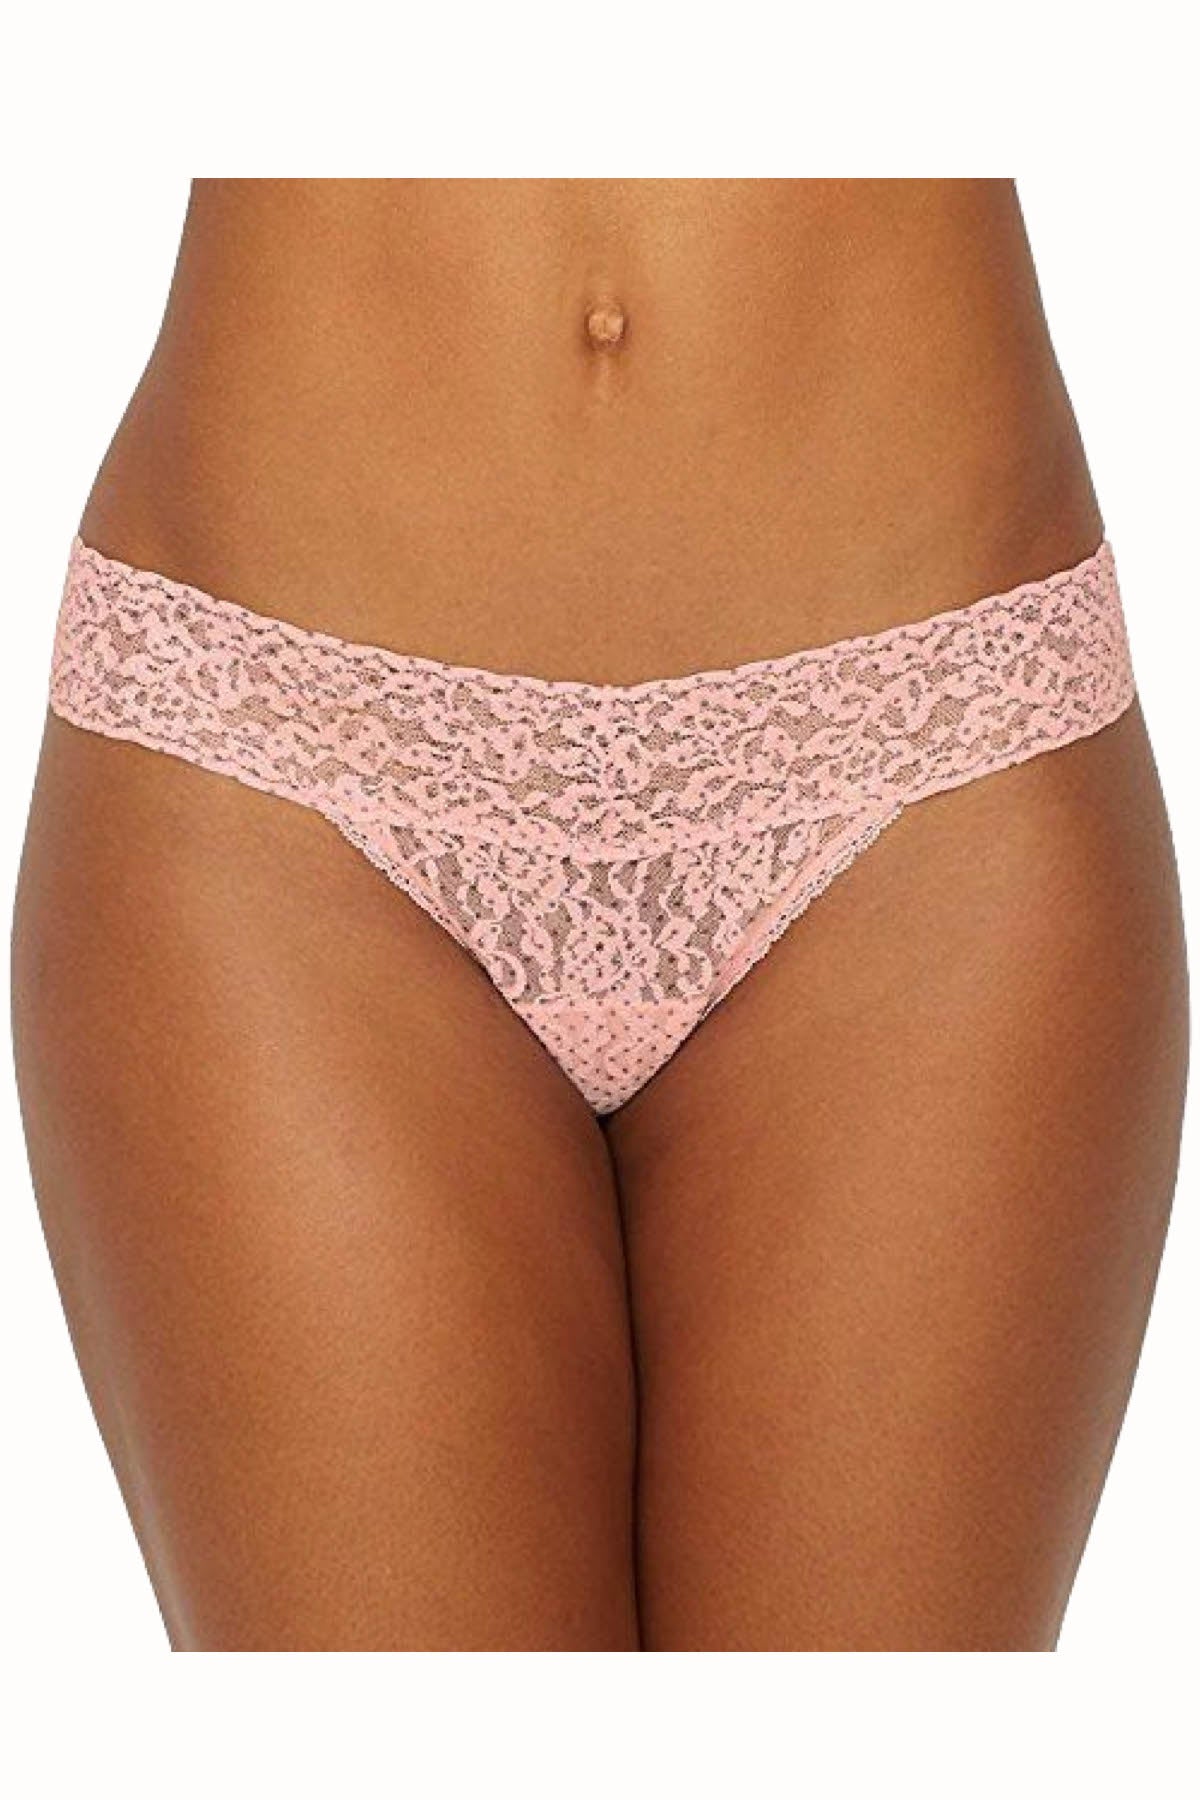 Maidenform Pink/Grey Polka-Dot One-Size Lace Thong